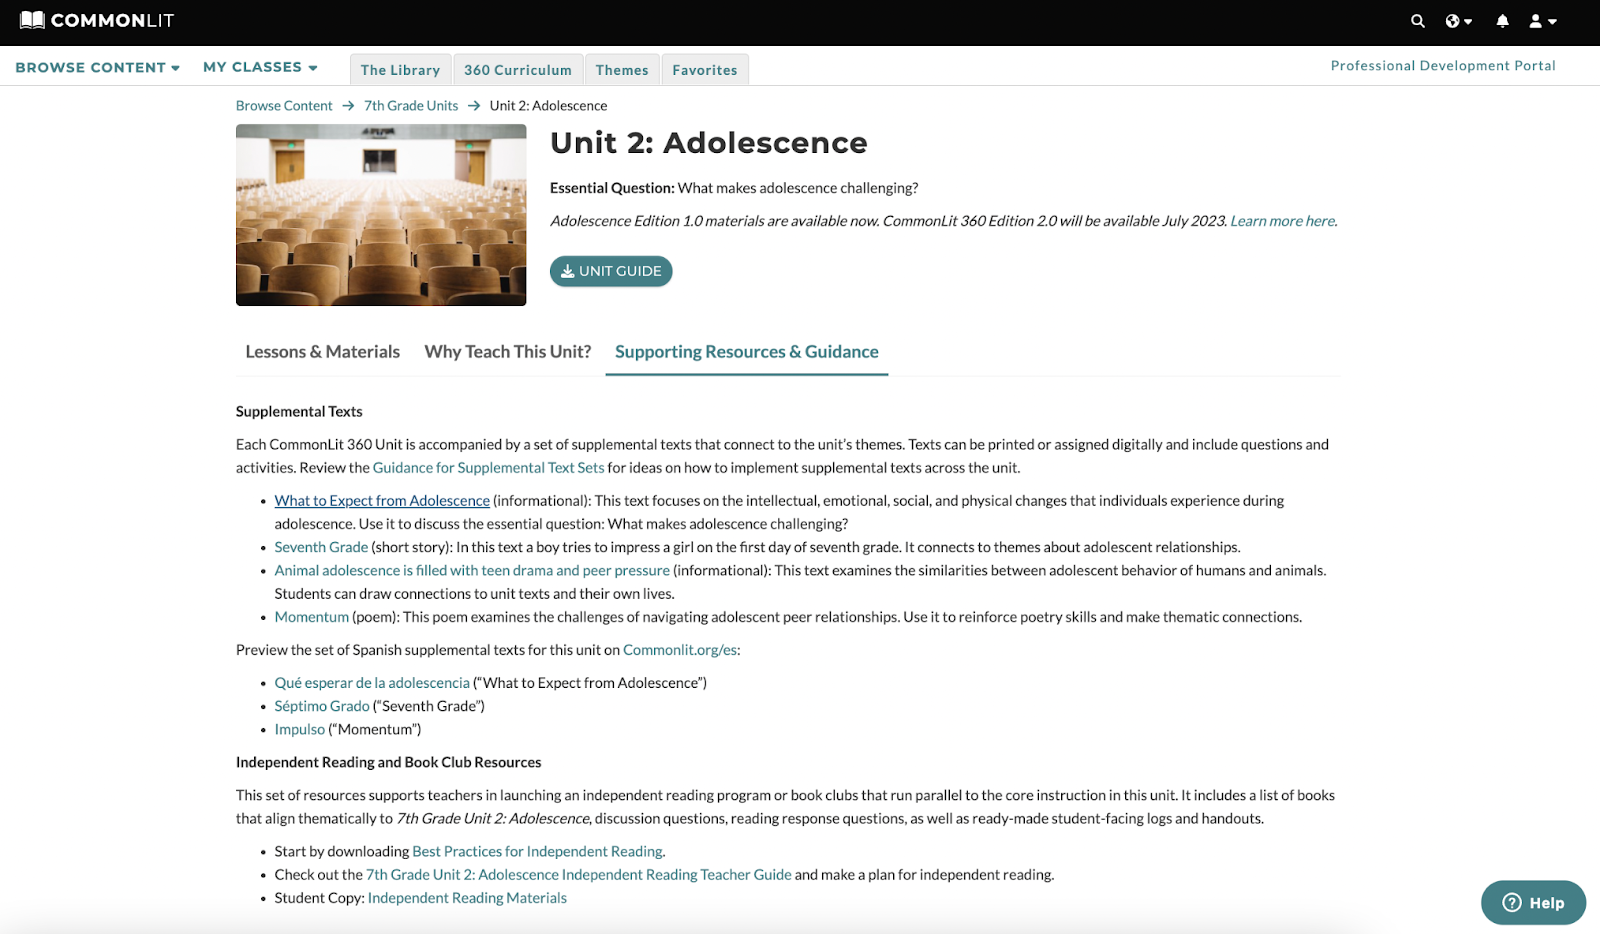 A screenshot of the Supporting Resources & Guidance page for Unit 2: Adolescence.